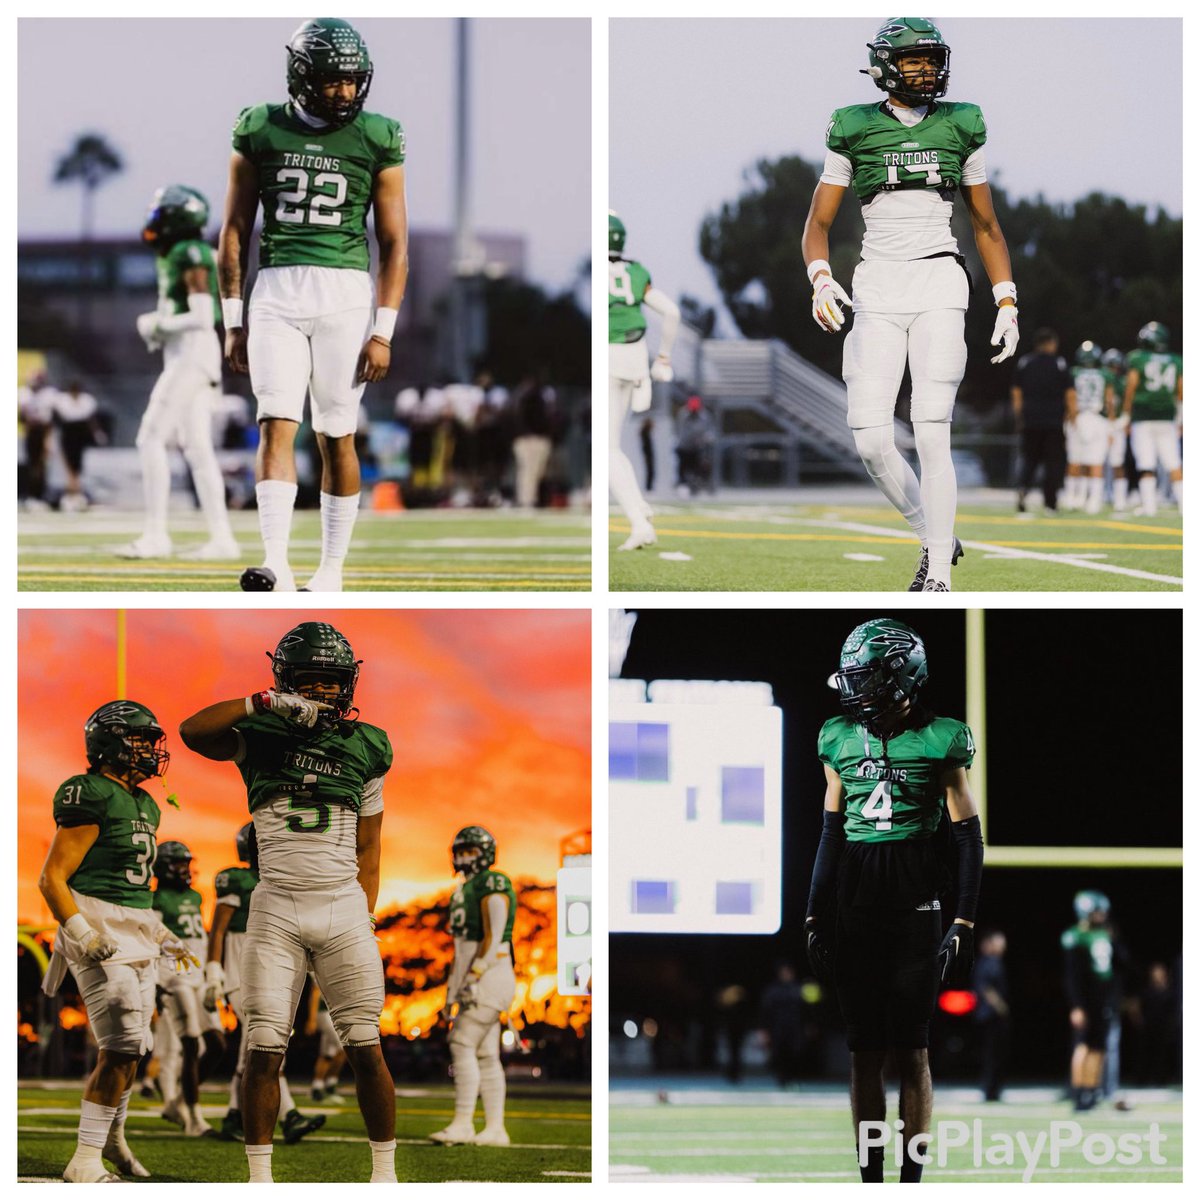 Congratulations to Jordan Whitney, Maliki Crawford, Josh, Joyner, and DayDay Aupiu for being selected to the 2022 CIF-SS Division 4 All CIF Team! @JordanWhitney23 @MalikiCrawford @JoshJoyner1_ @aupiu45